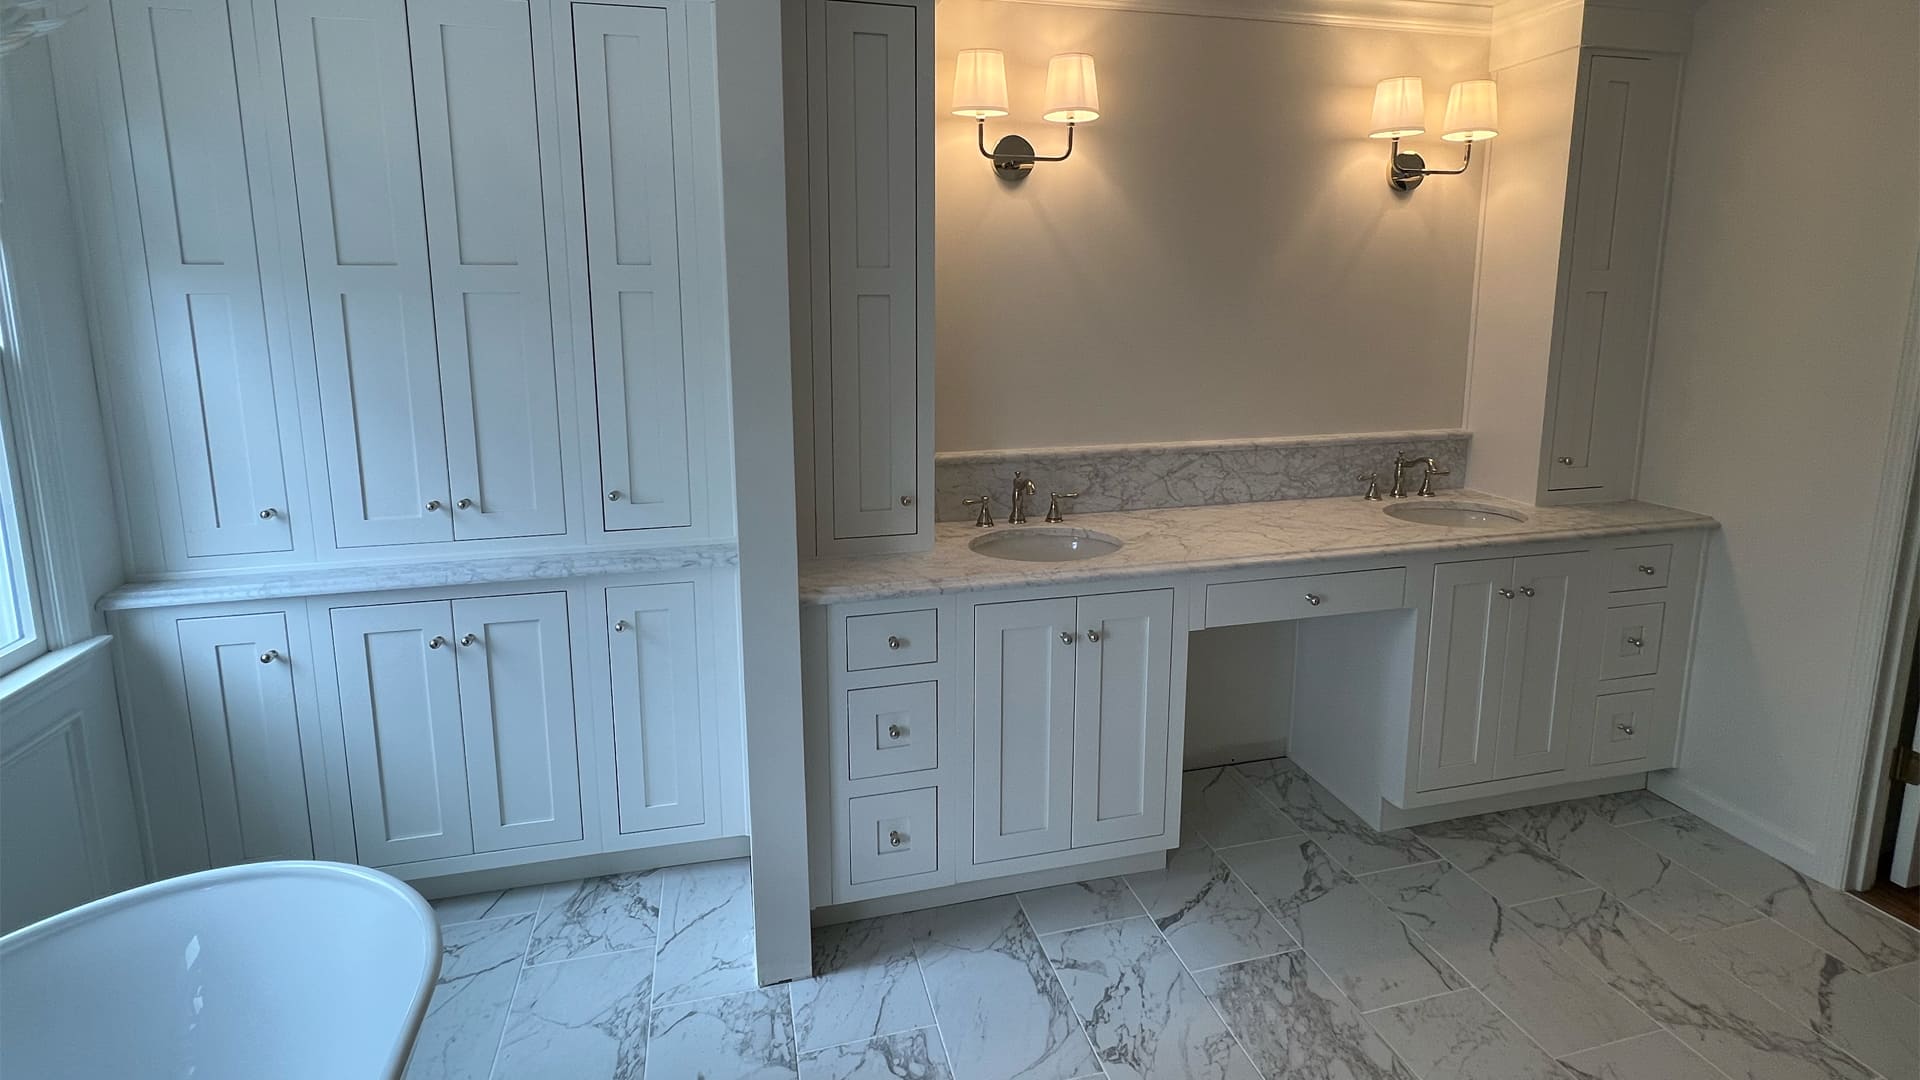 A relaxing all-white bathroom with marbled floor tiles, a double sink vanity with marbled counters, and a spacious built-in linen cabinet